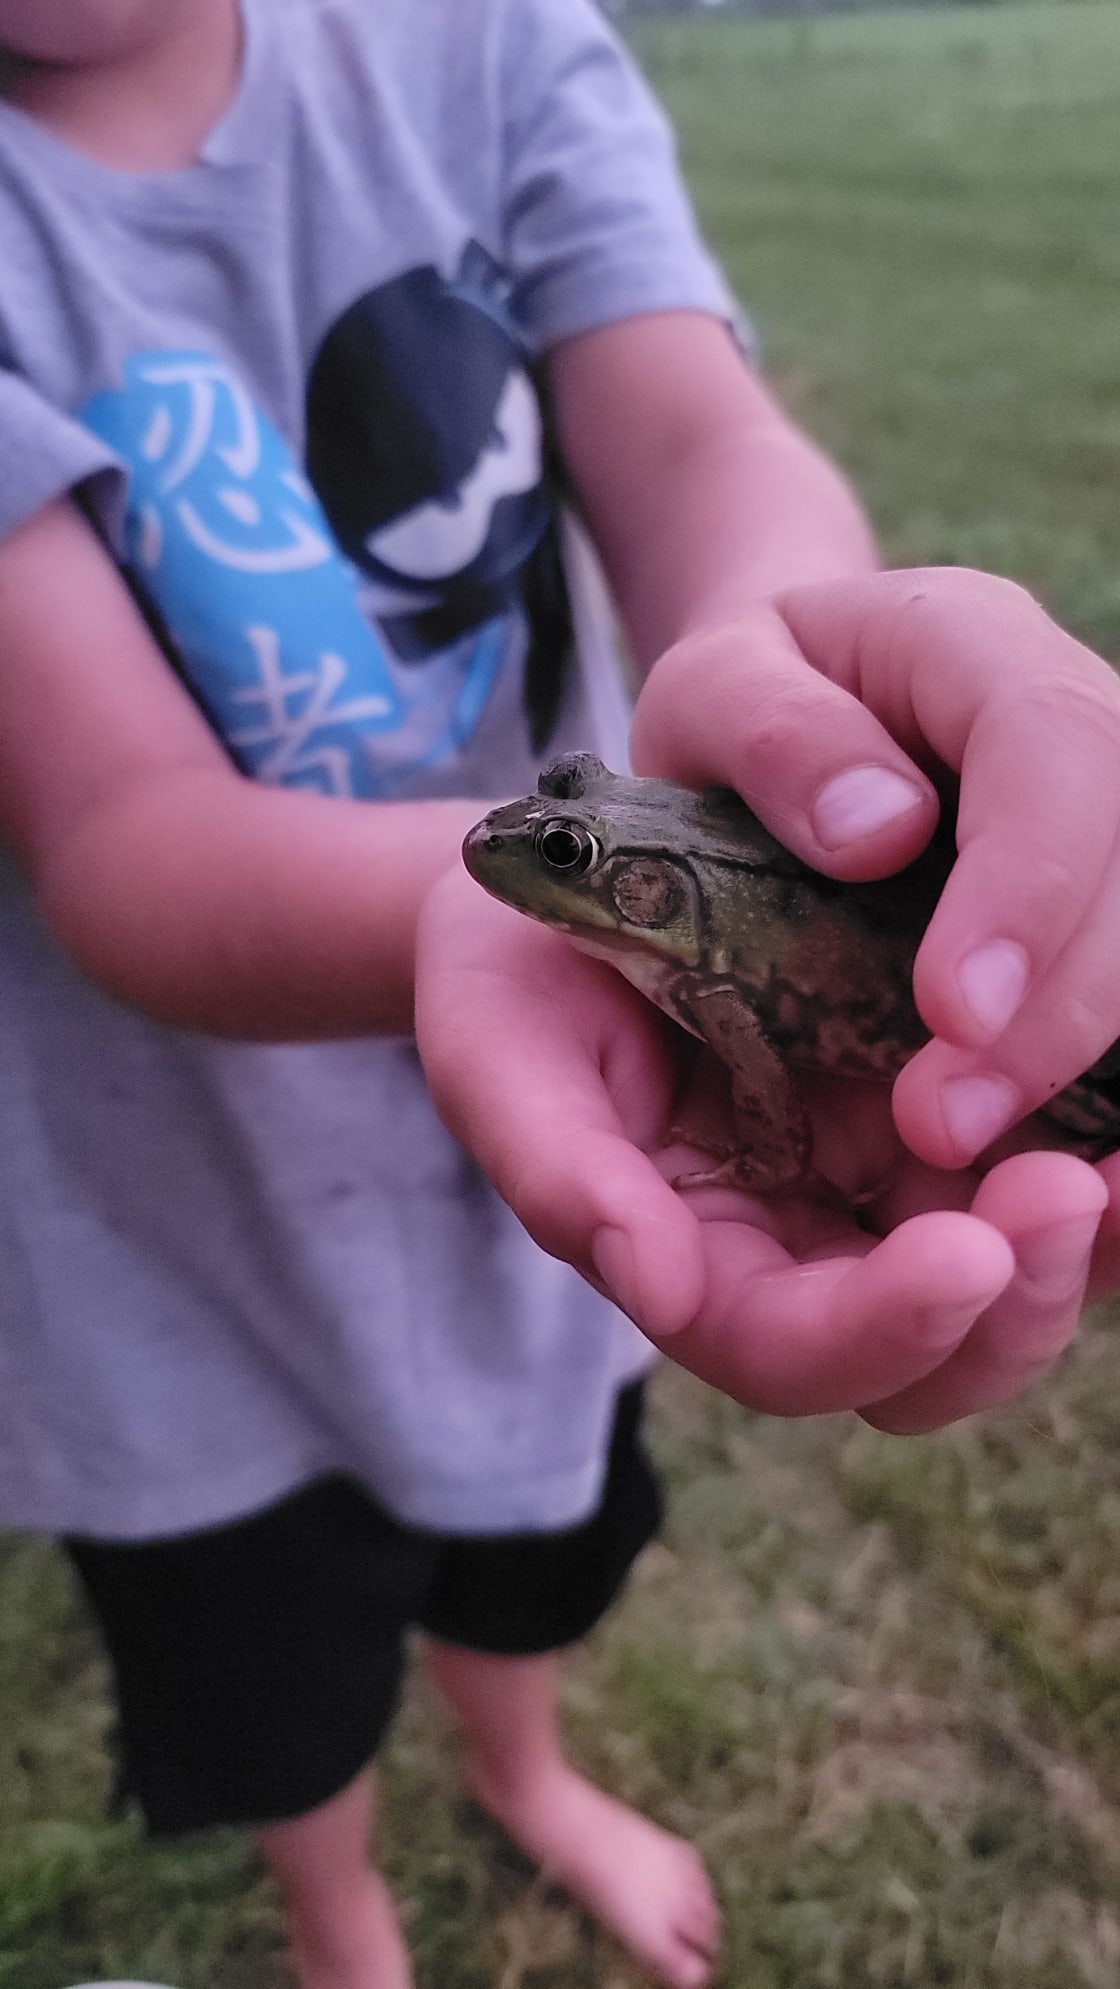 My son found a frog!